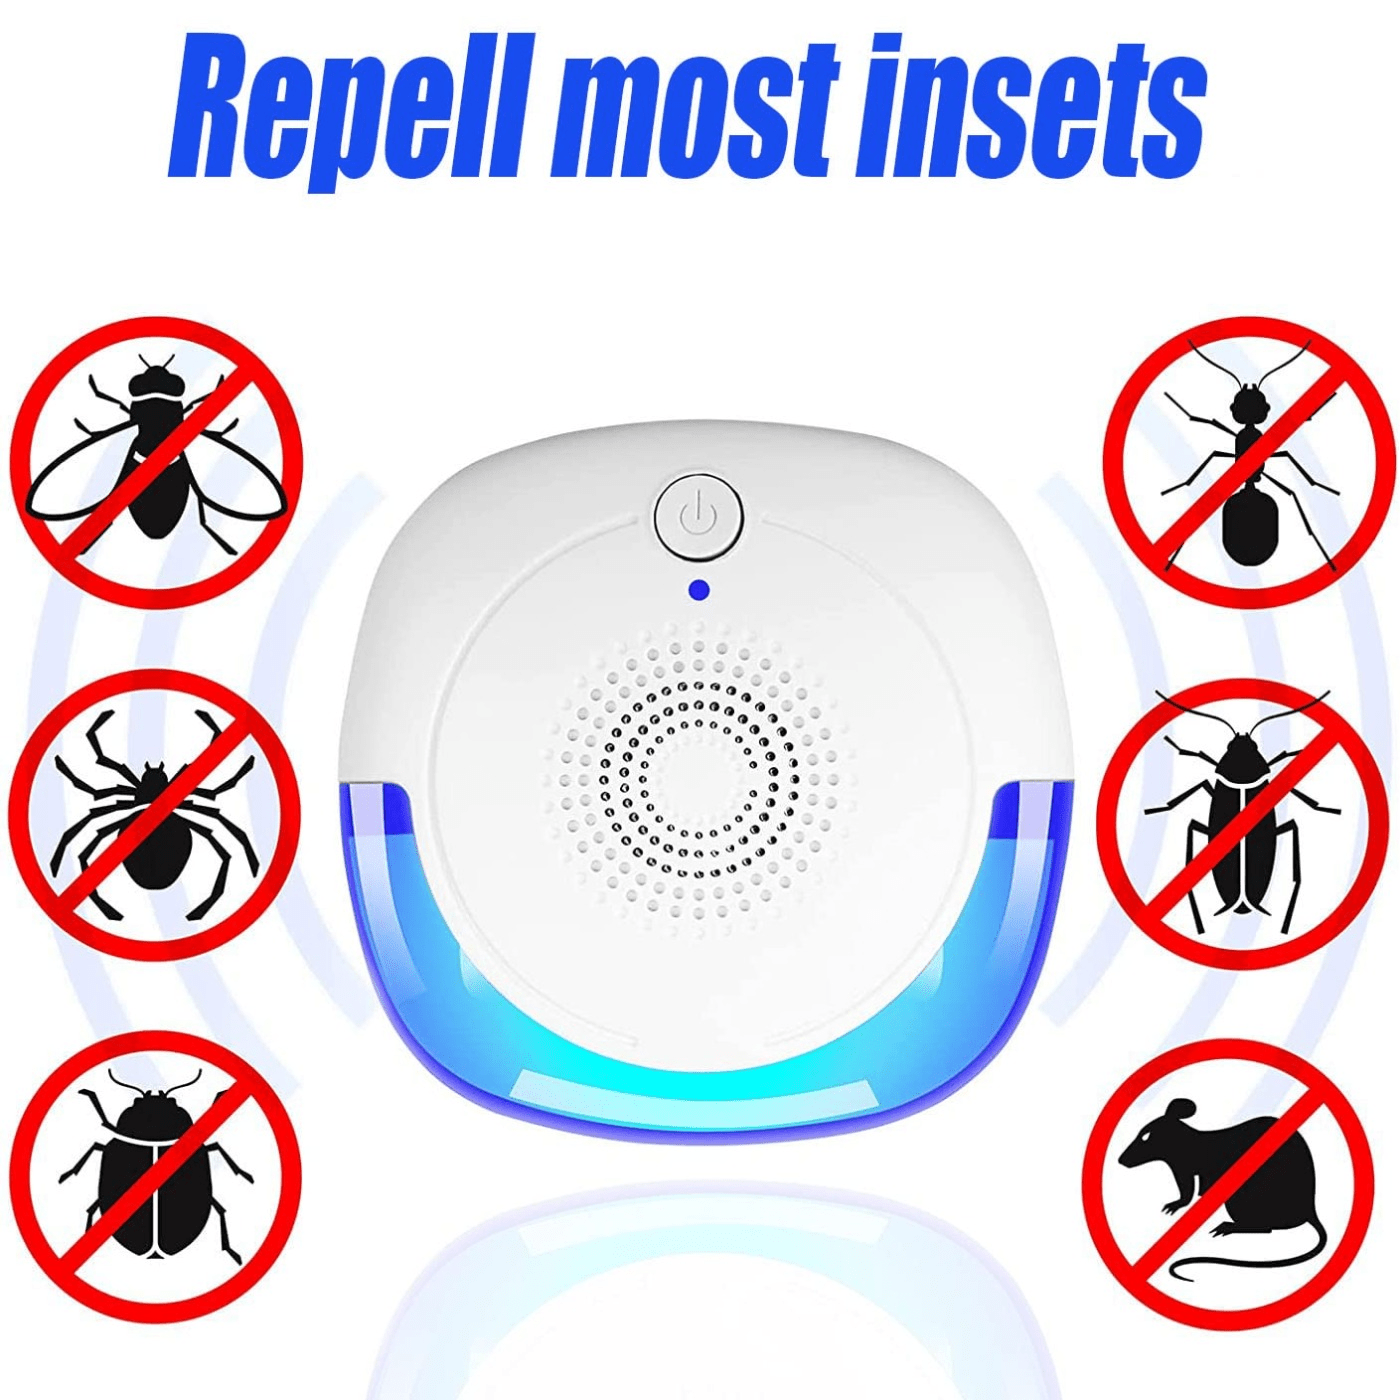 1pc 6pcs 6pcs ultrasonic pest repeller electronic insect control for roaches bed bugs mice rodents and mosquitoes indoor reject repellent for bedroom kitchen and garage safe and effective pest control solution details 1